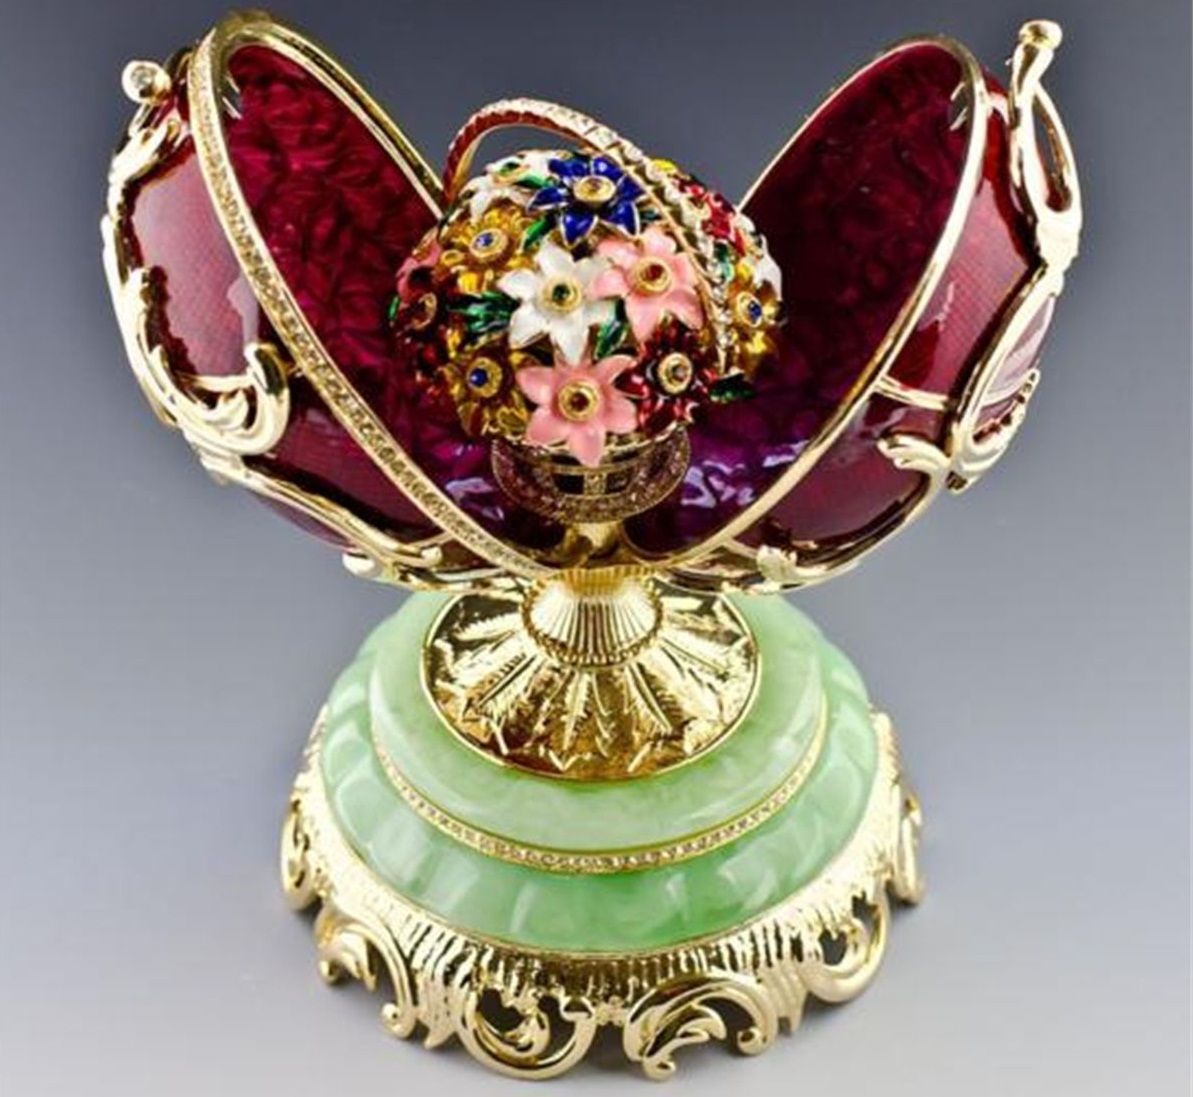 Its method of construction is noticeably sub par, having diamonds of mismatched size and with inferior quality attachments, and two halves that are asymmetrical, failings not characteristic of Fabergé's workshop.